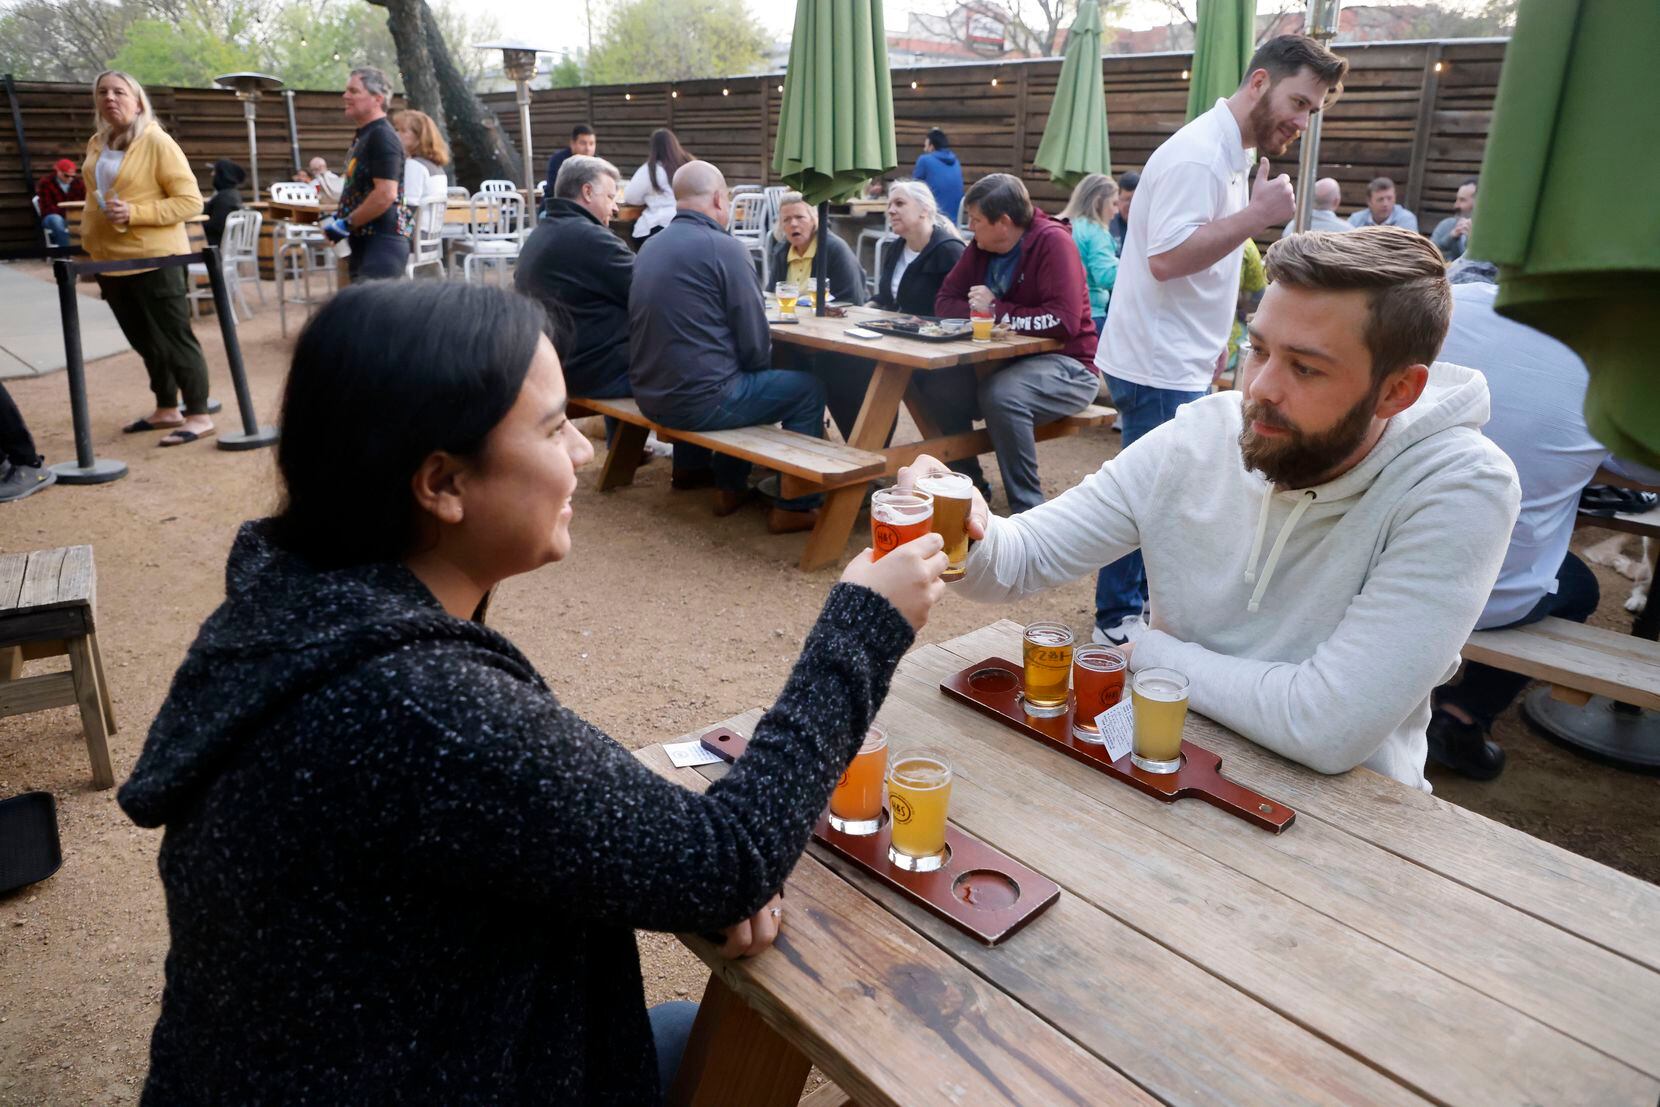 Dominica LoZada, left, and Patrick Jimision, right, of Grapevine, toast to their beer...